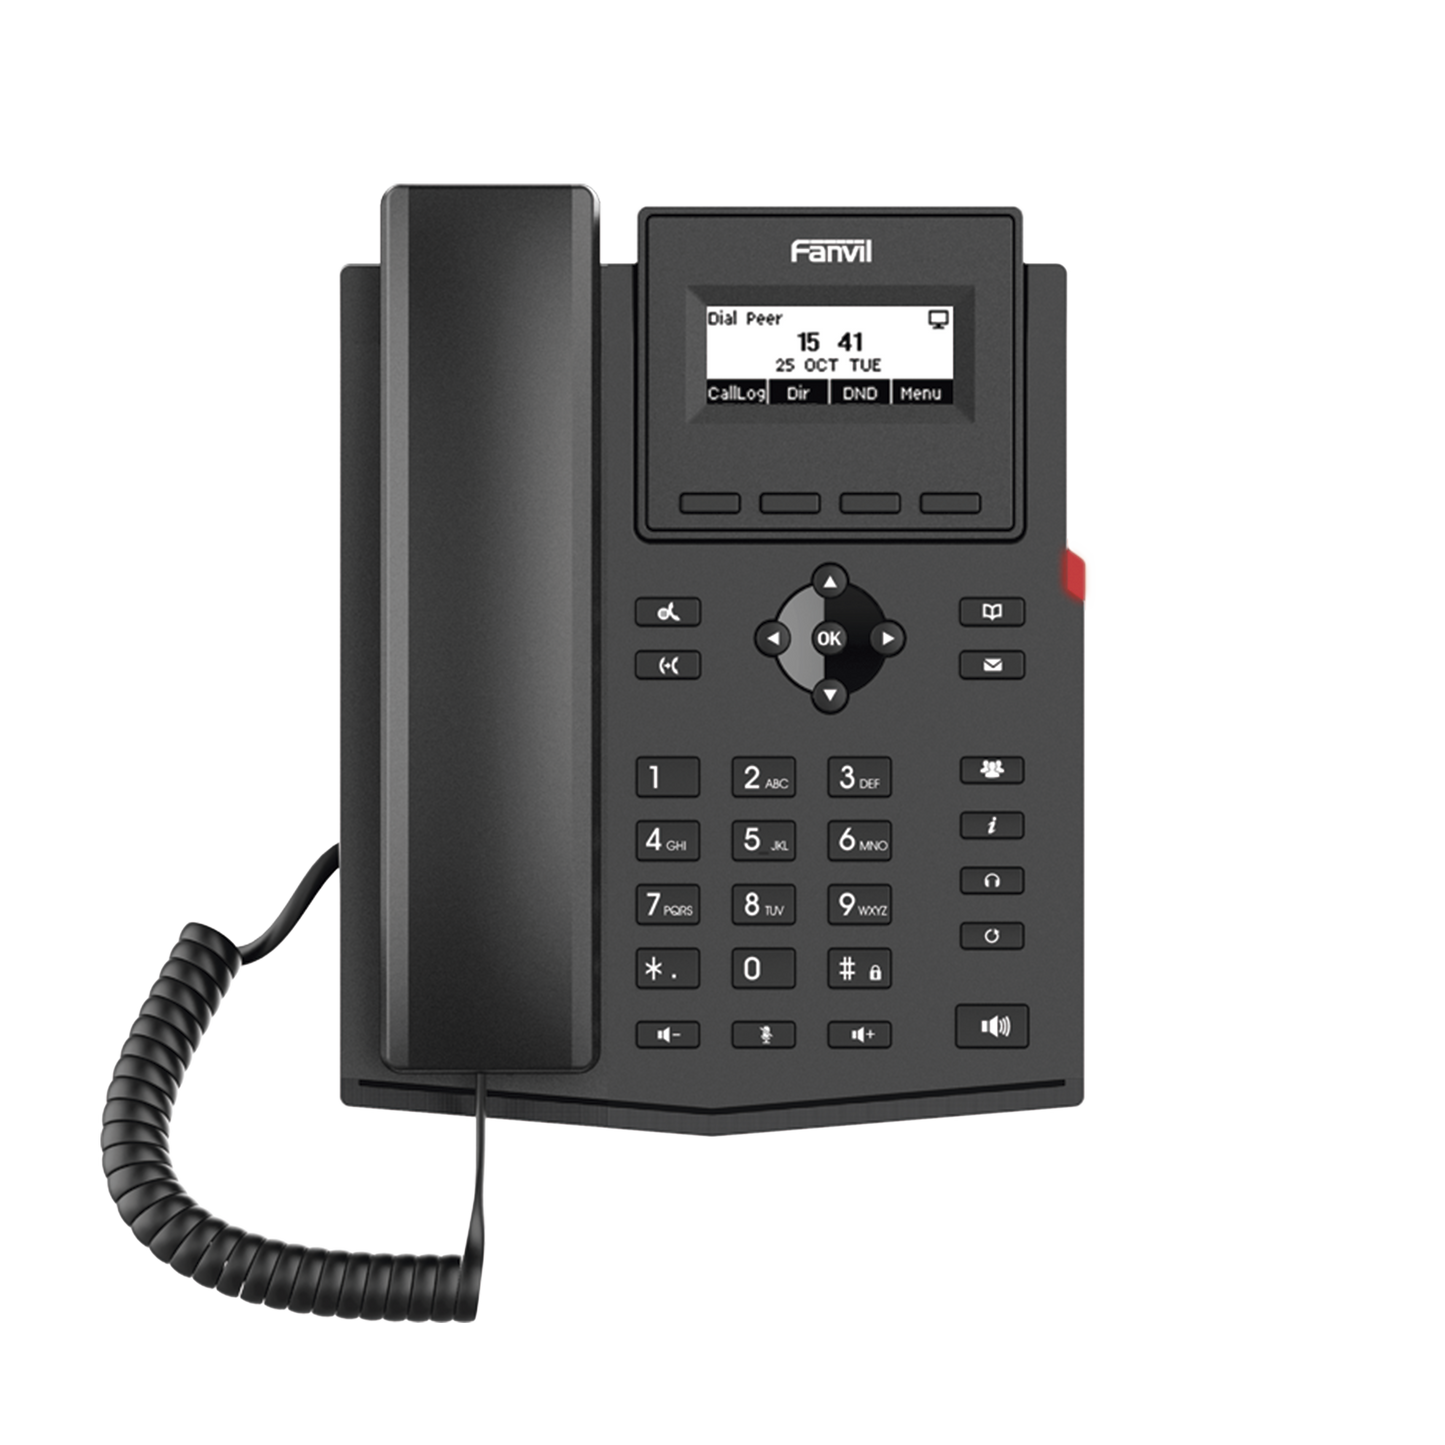 Fanvil X1P is an entry-level, cost-effective professional desktop IP Telephone with Opus